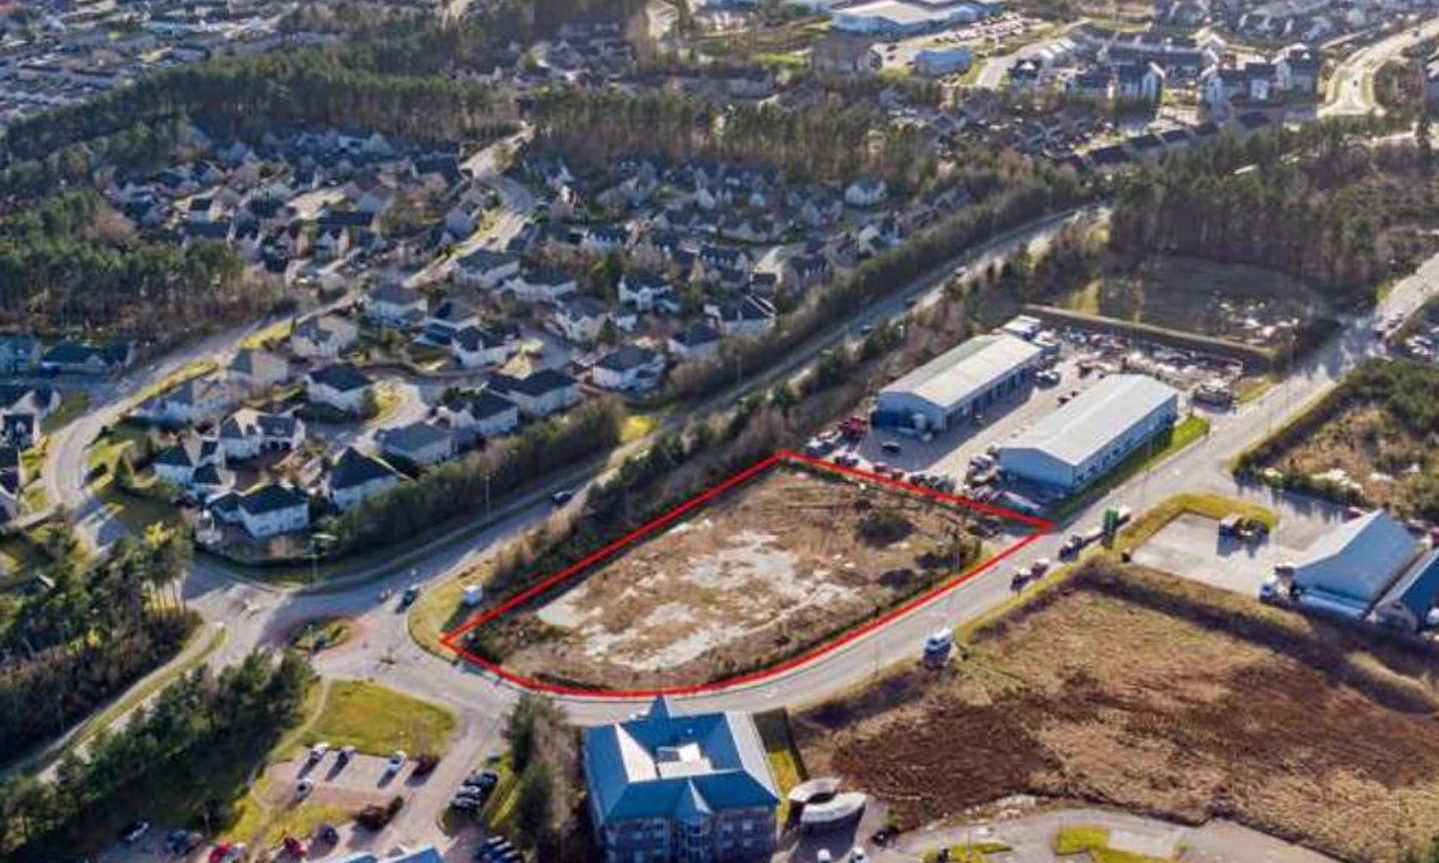 The new Howdens is planned for Banchory Business Park.